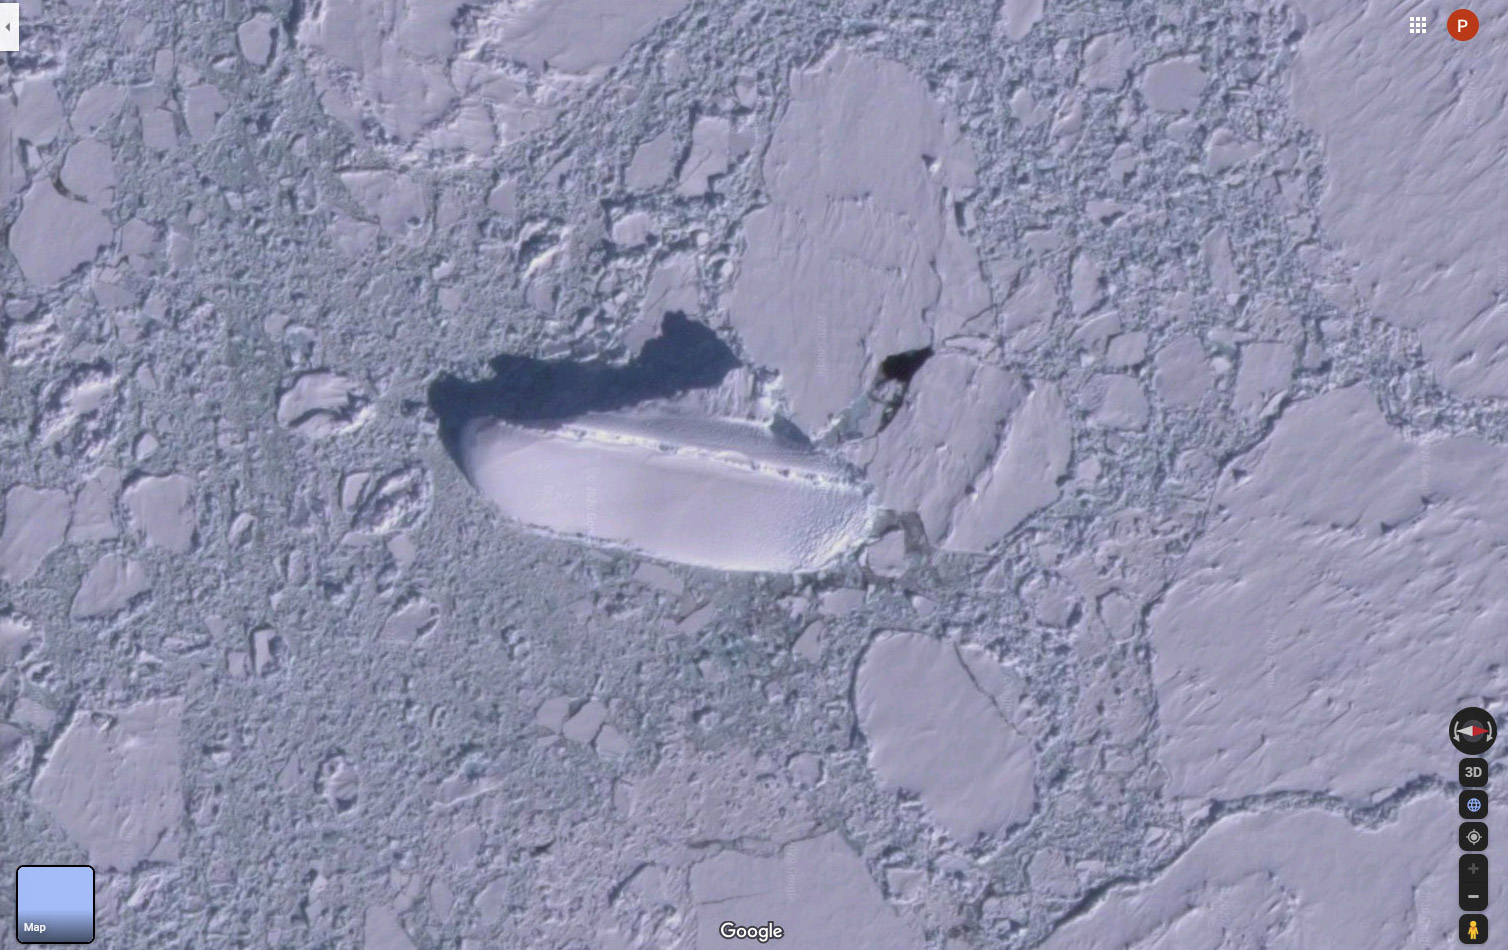 Google Earth users suddenly spotted 400ft ice ship in iceberg 4